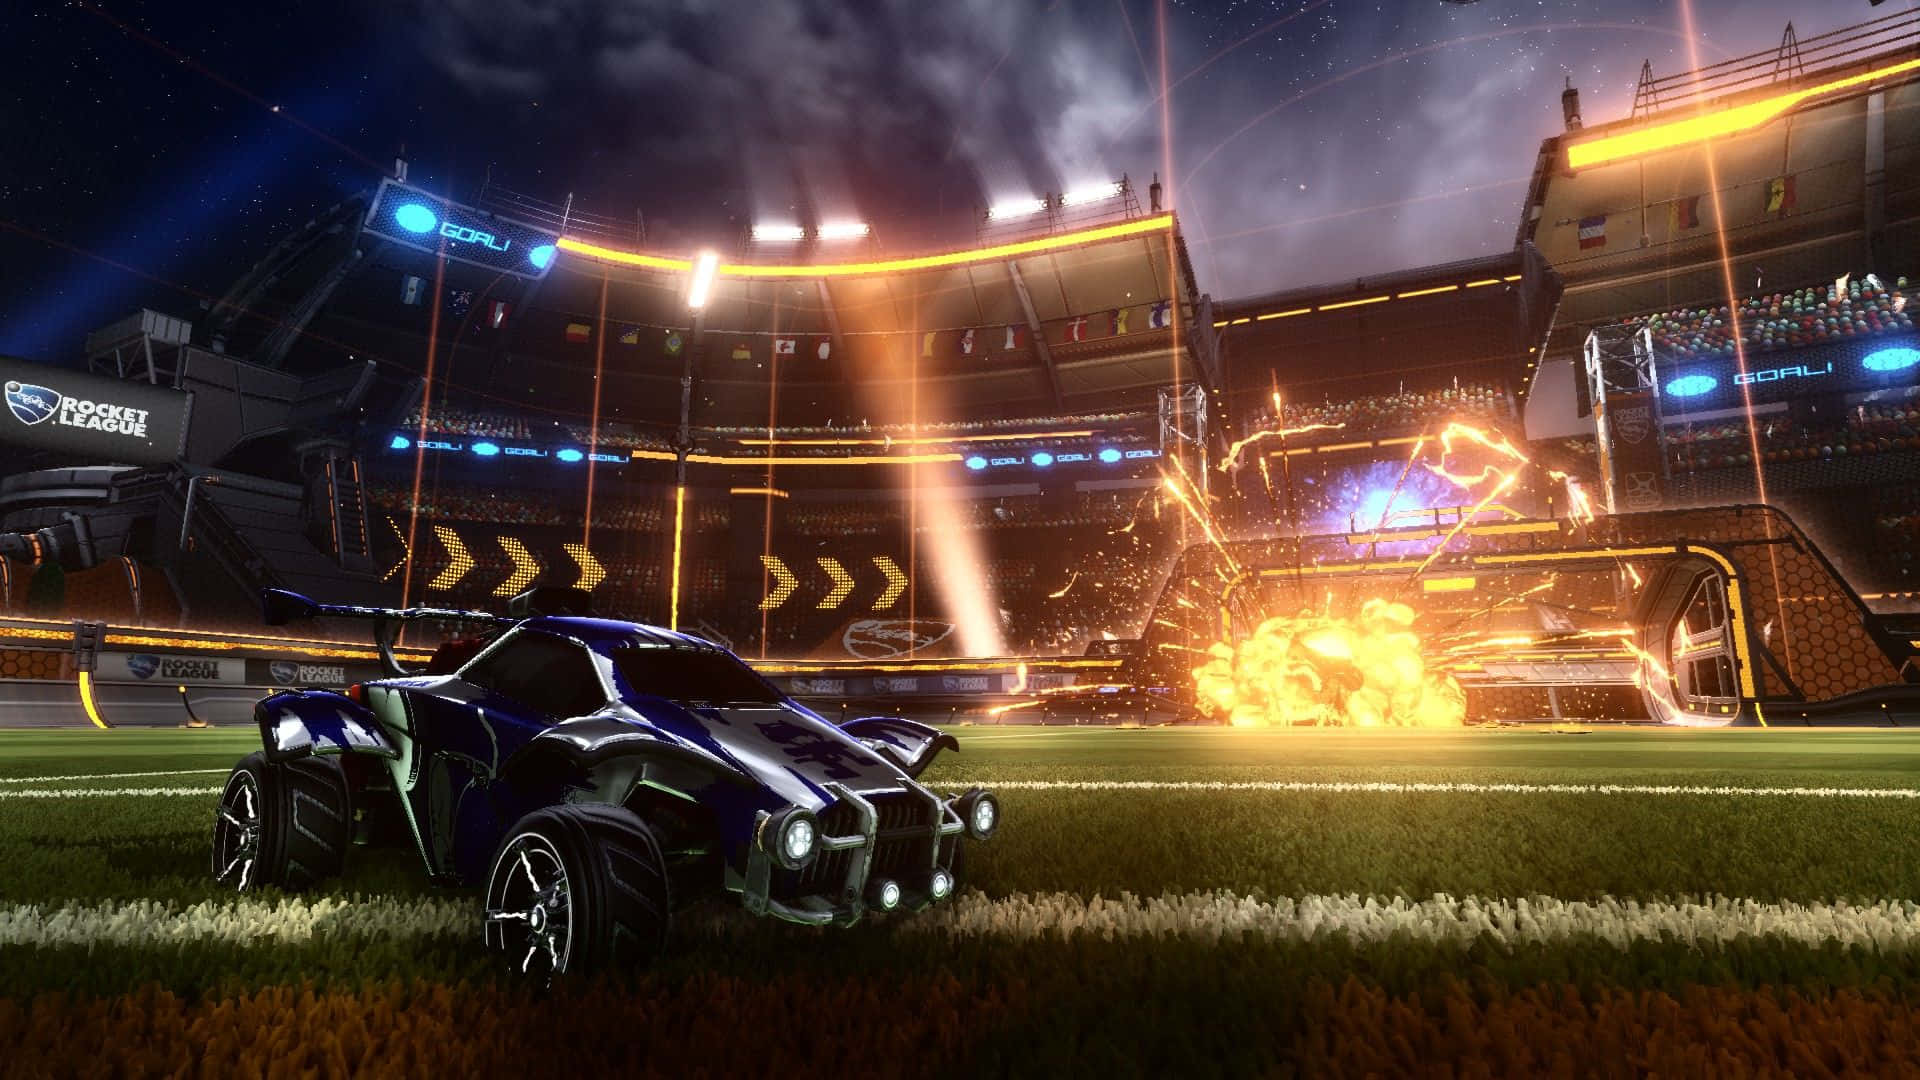 Have Fun Playing Rocket League in Beautiful 1920x1080 Resolution